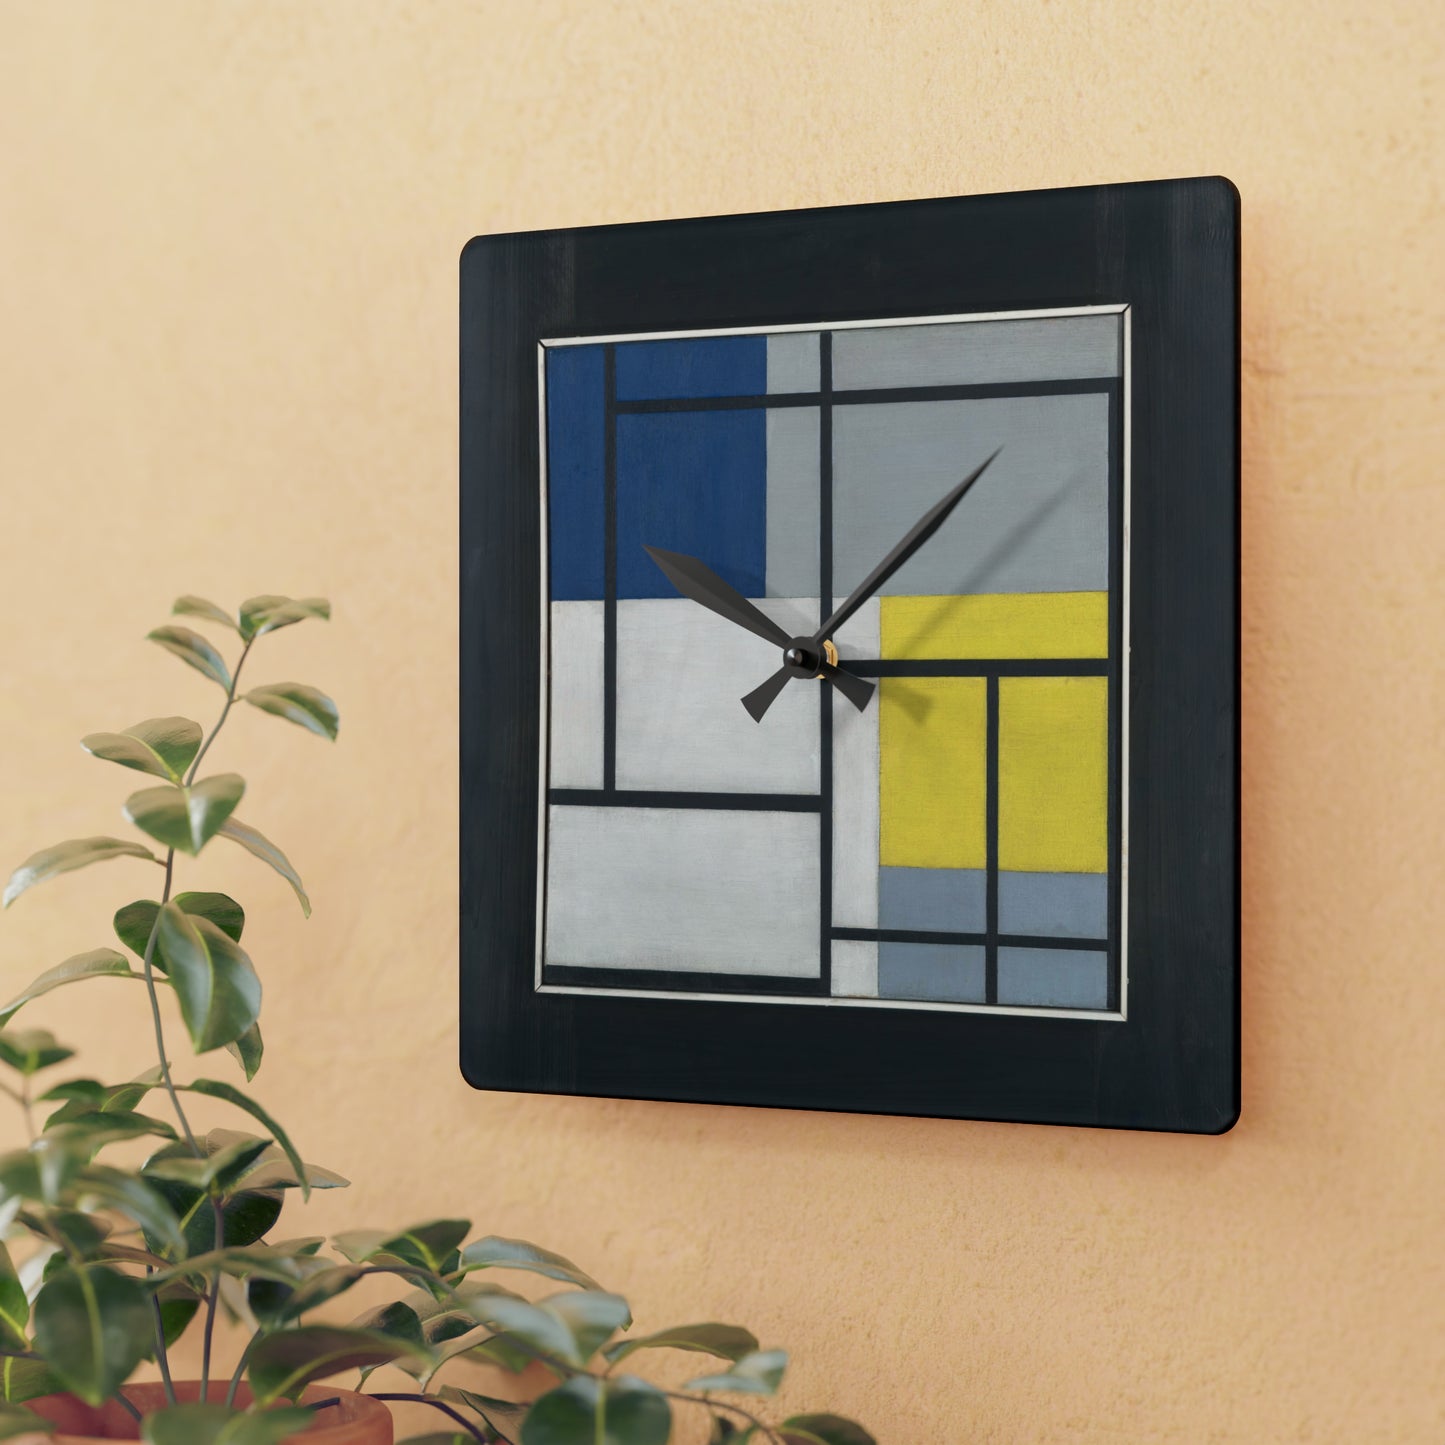 THEO VAN DOESBURG - SIMULTANEOUS COMPOSITION - WALL CLOCK 